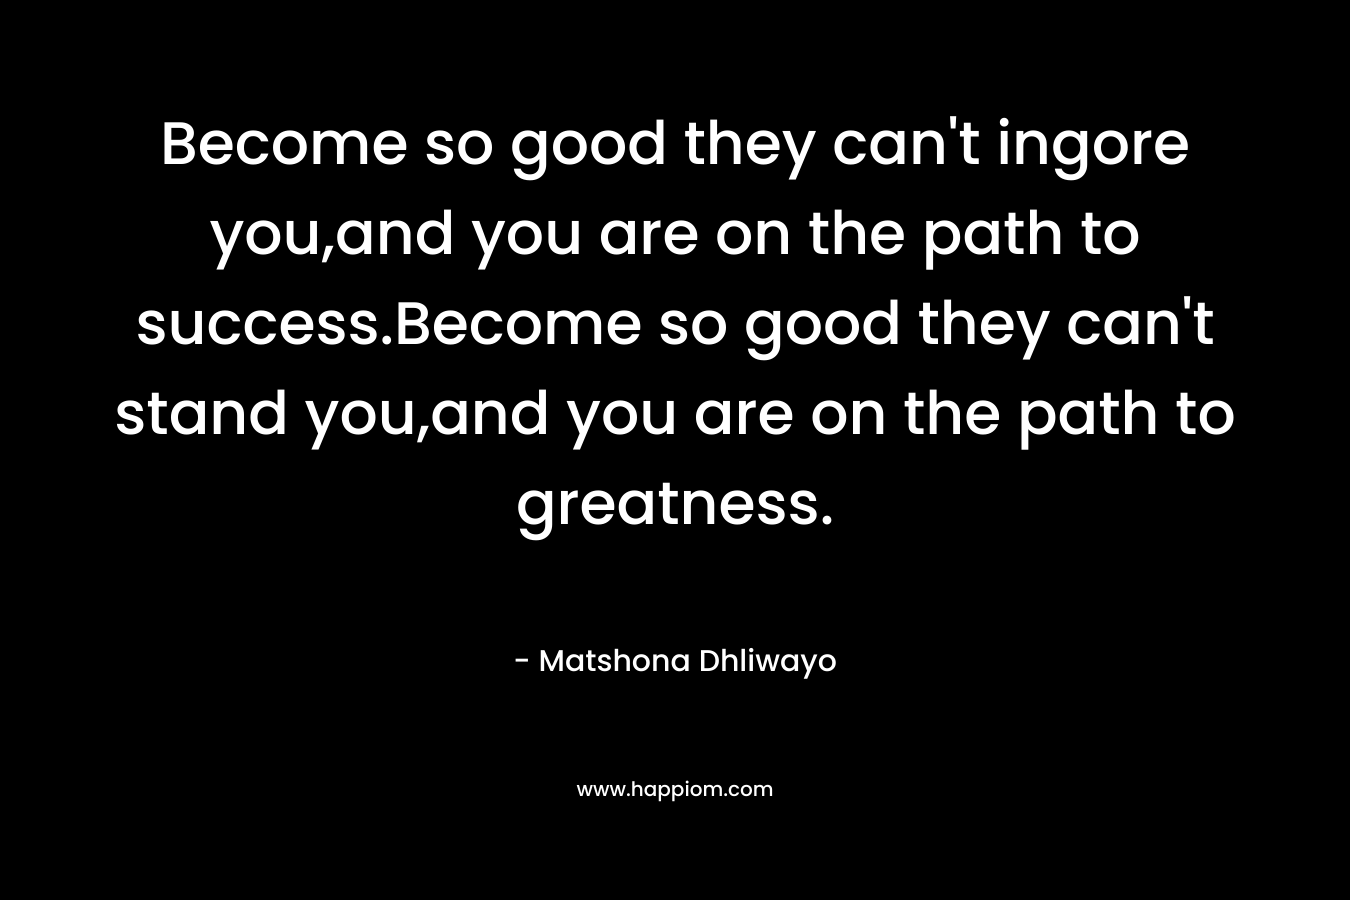 Become so good they can’t ingore you,and you are on the path to success.Become so good they can’t stand you,and you are on the path to greatness. – Matshona Dhliwayo